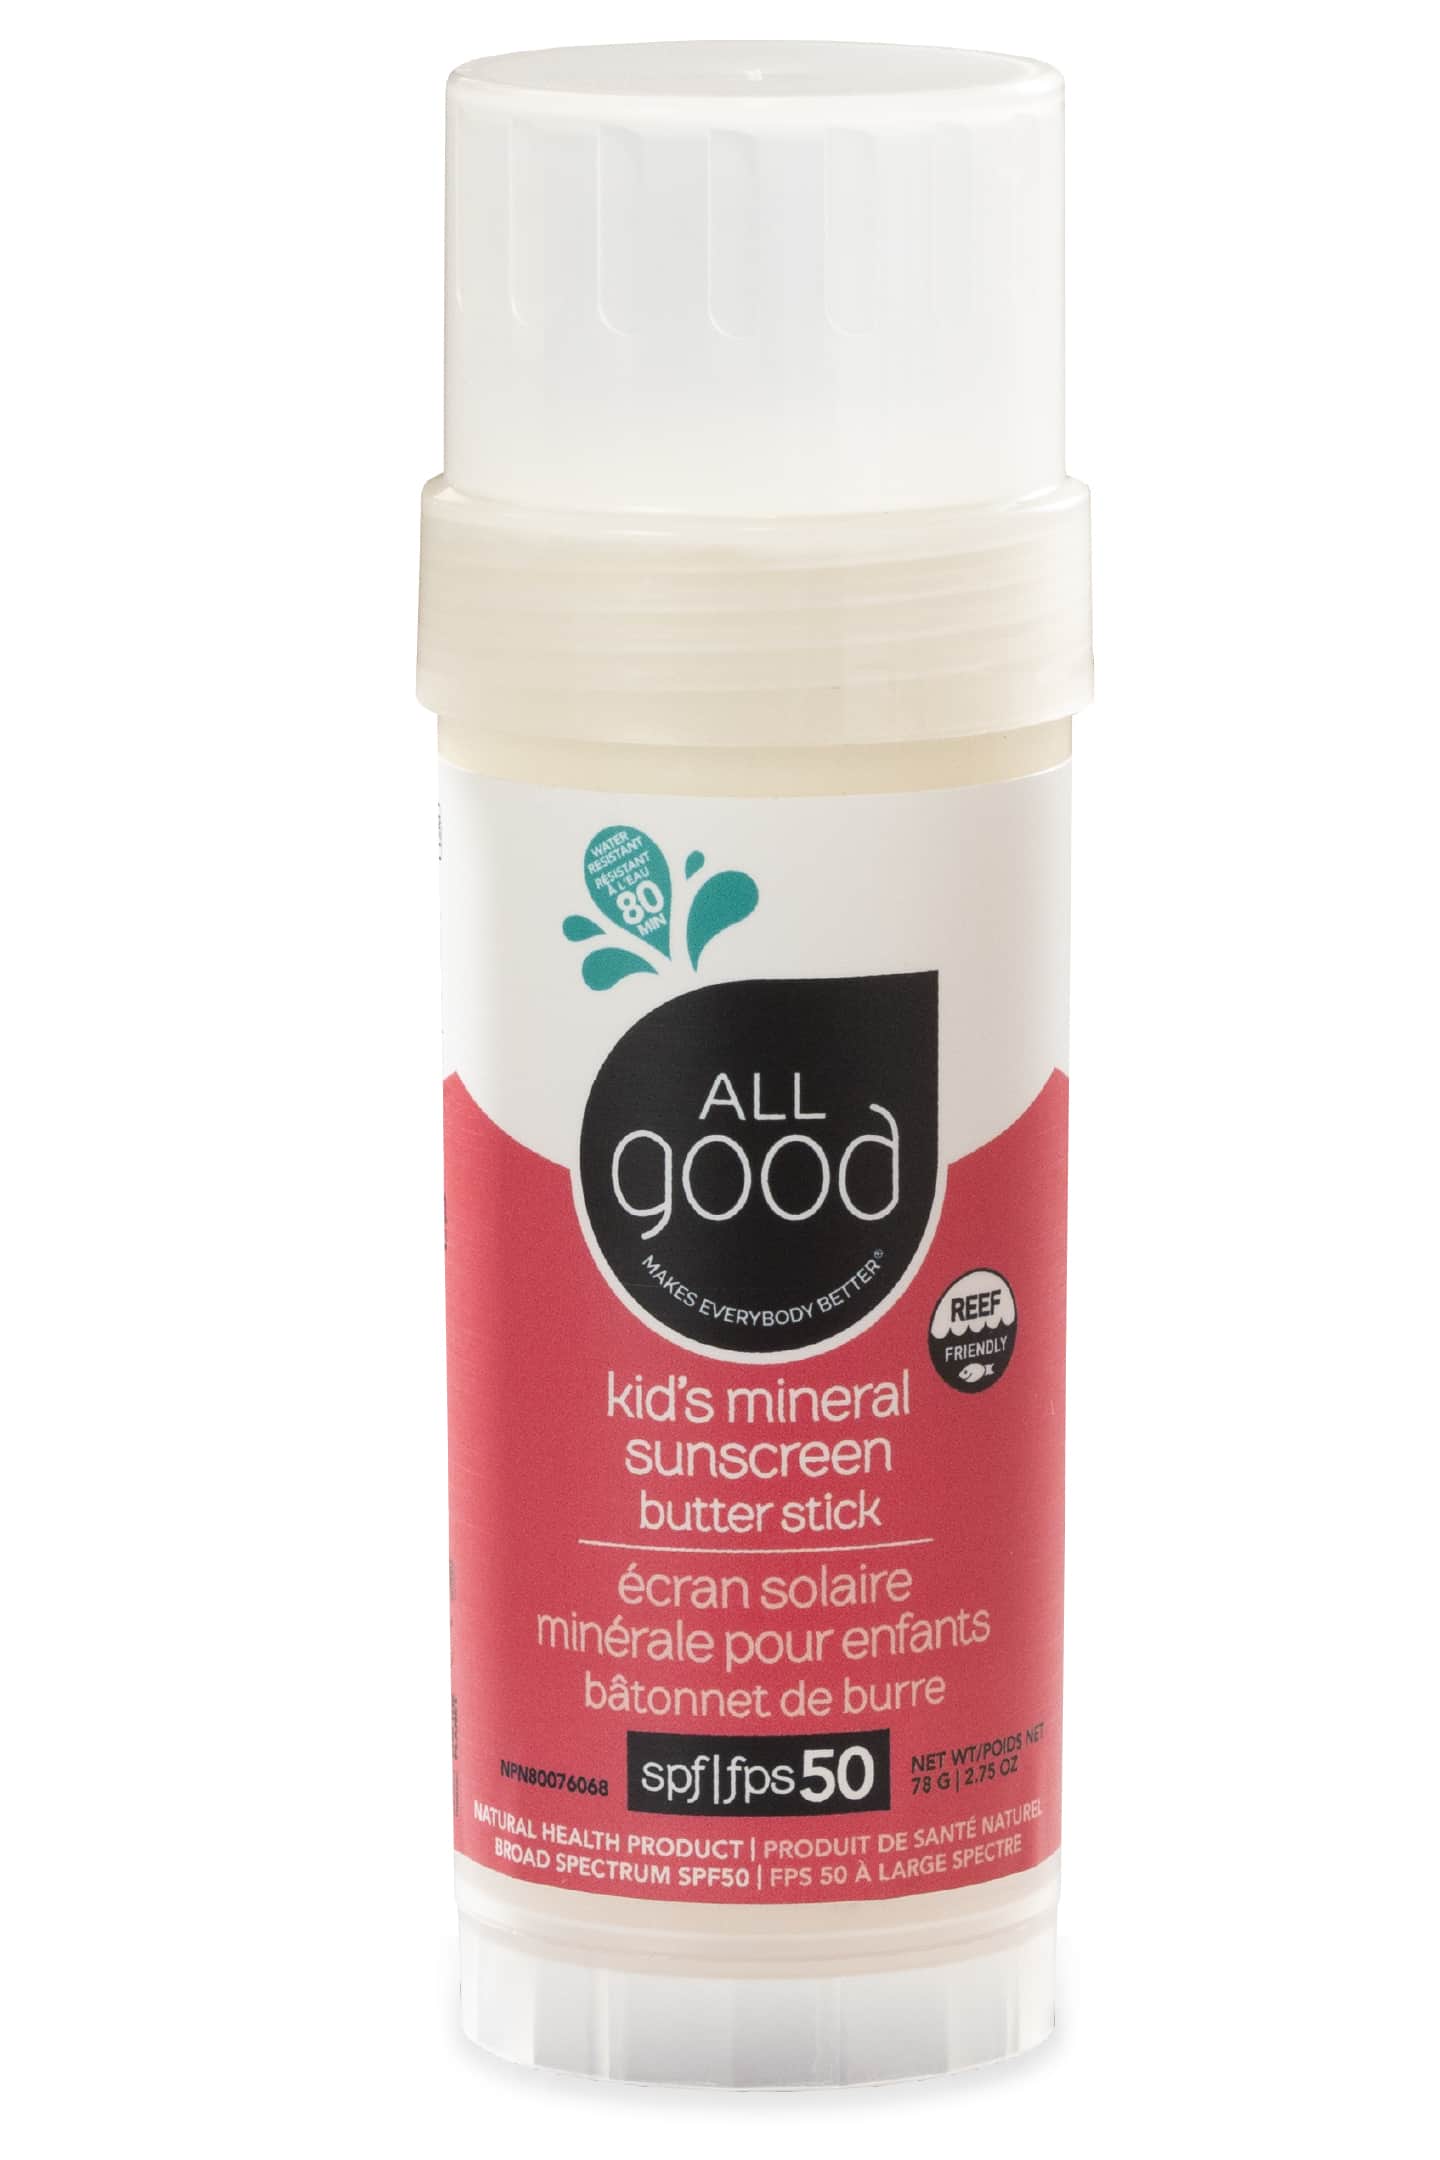 Kid's Mineral Sunscreen Butter Stick SPF 50 by All Good, 78g